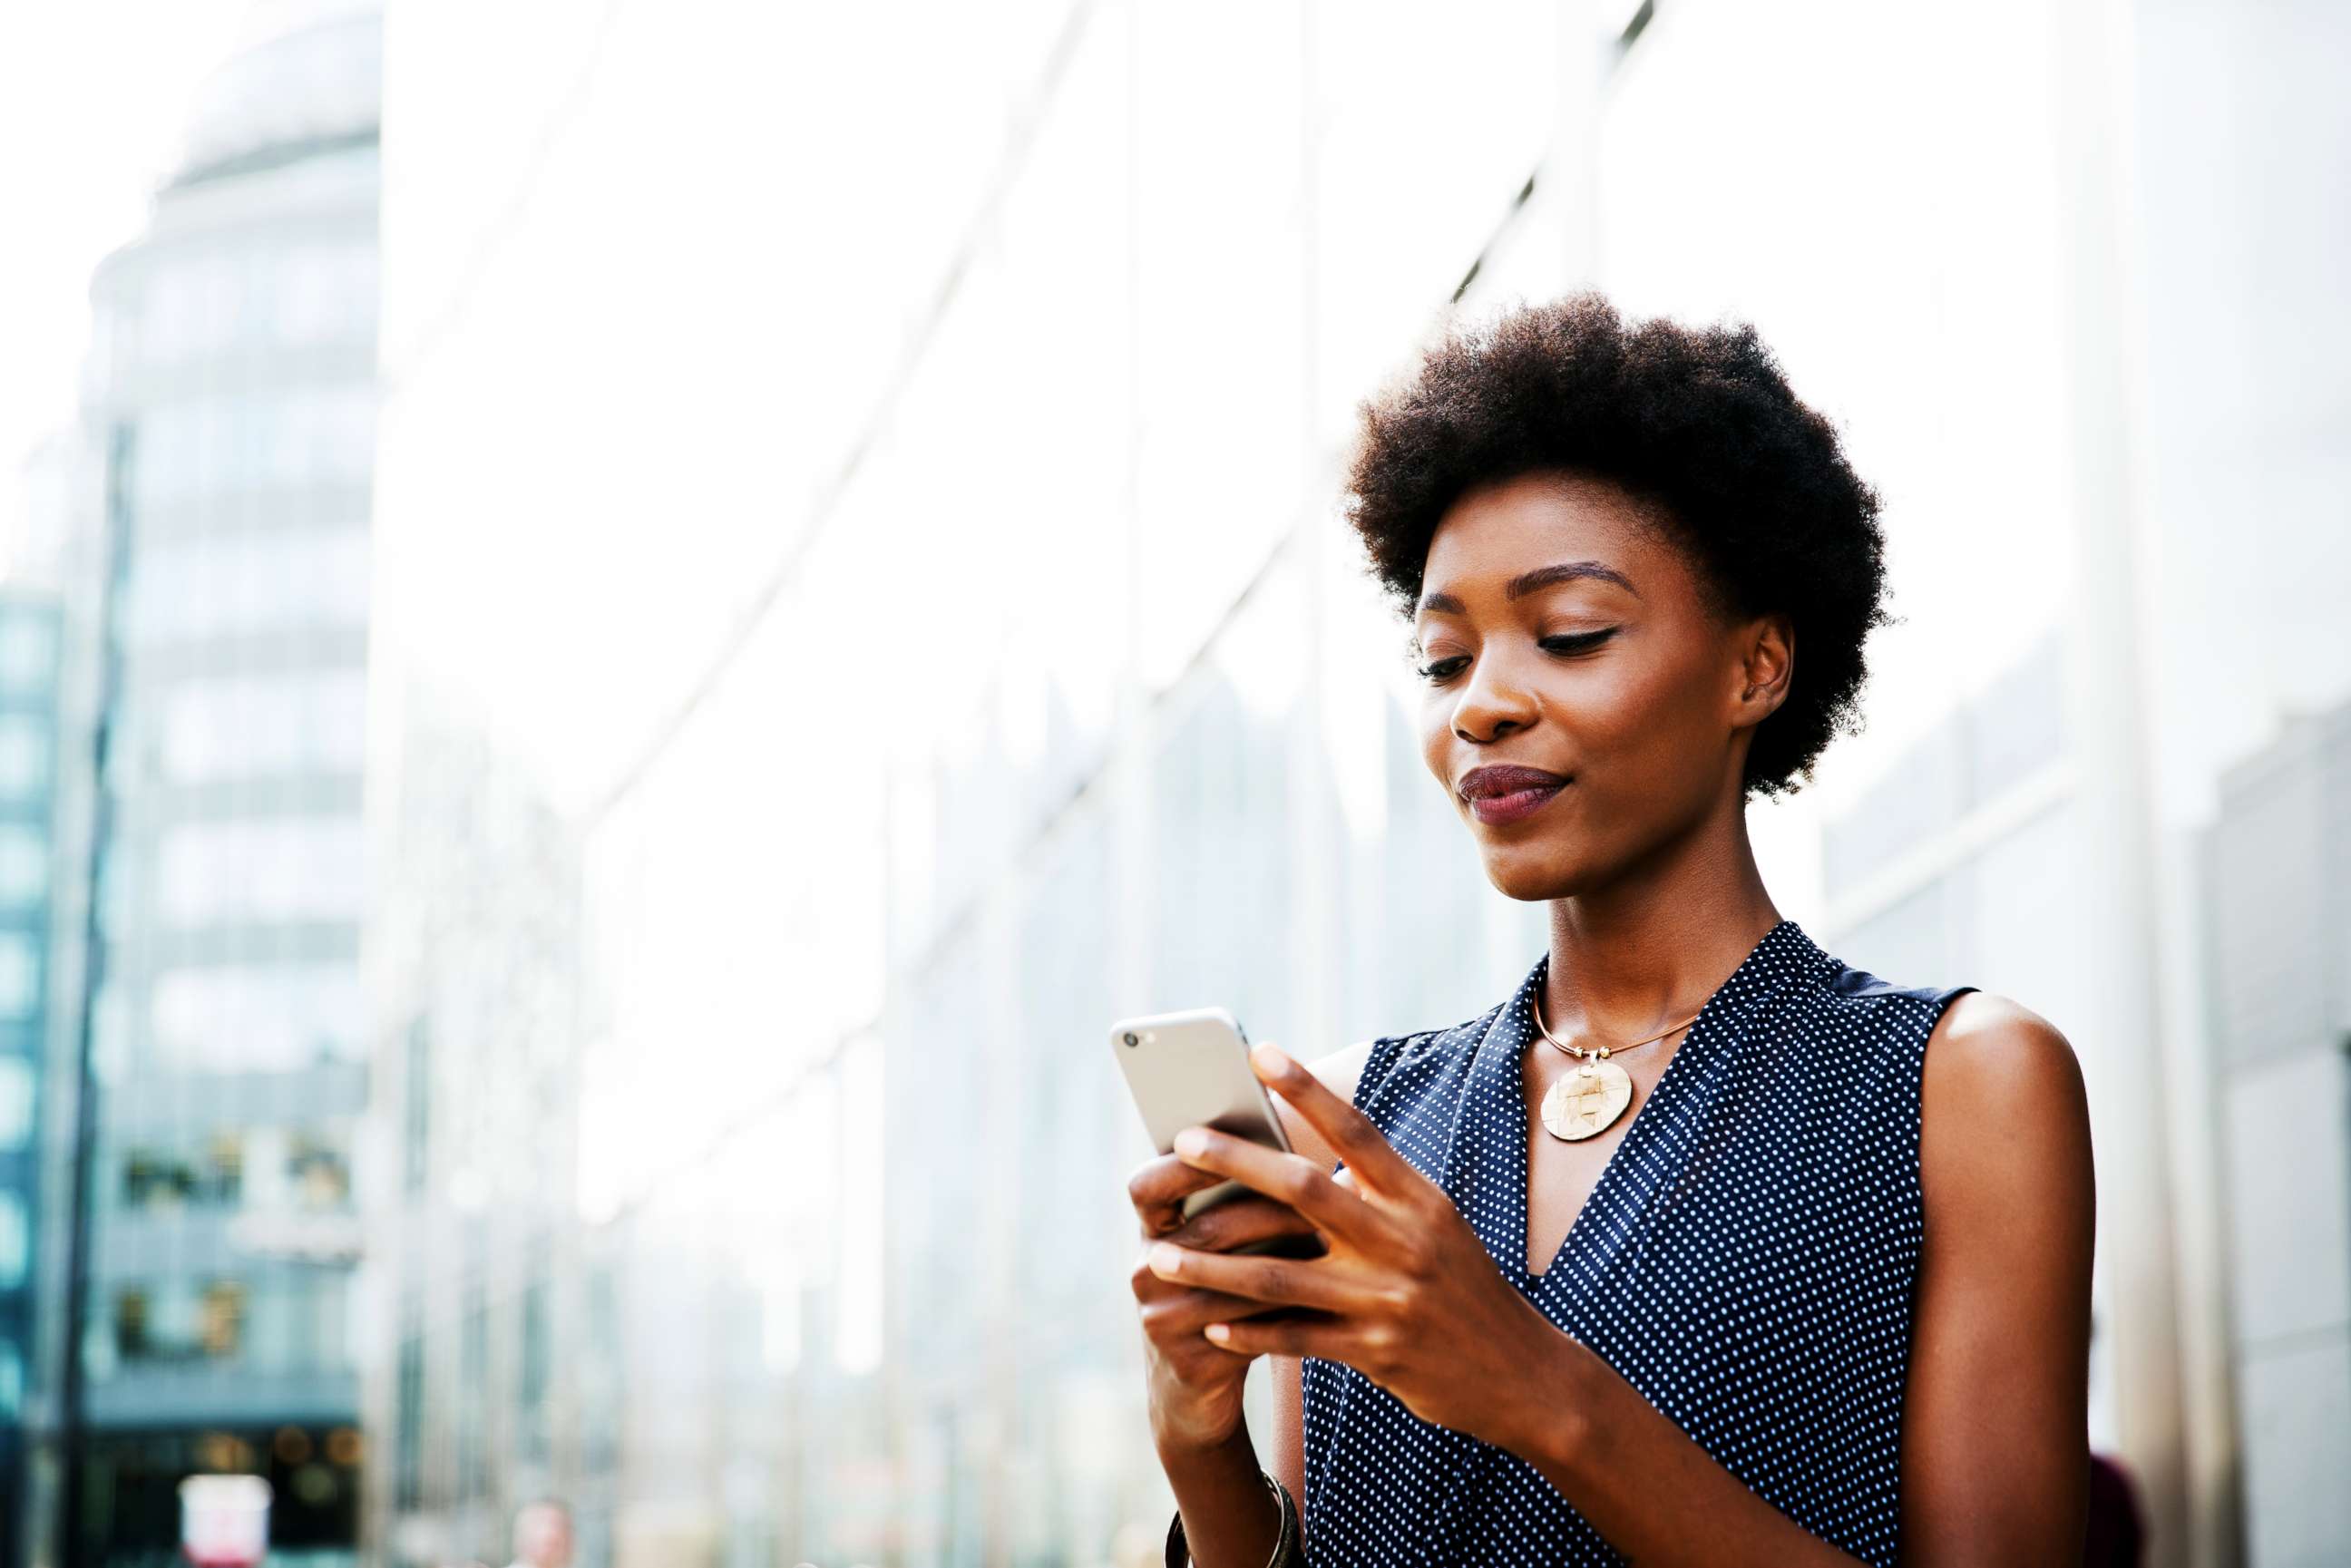 PHOTO: A woman uses a cellphone in this stock photo.